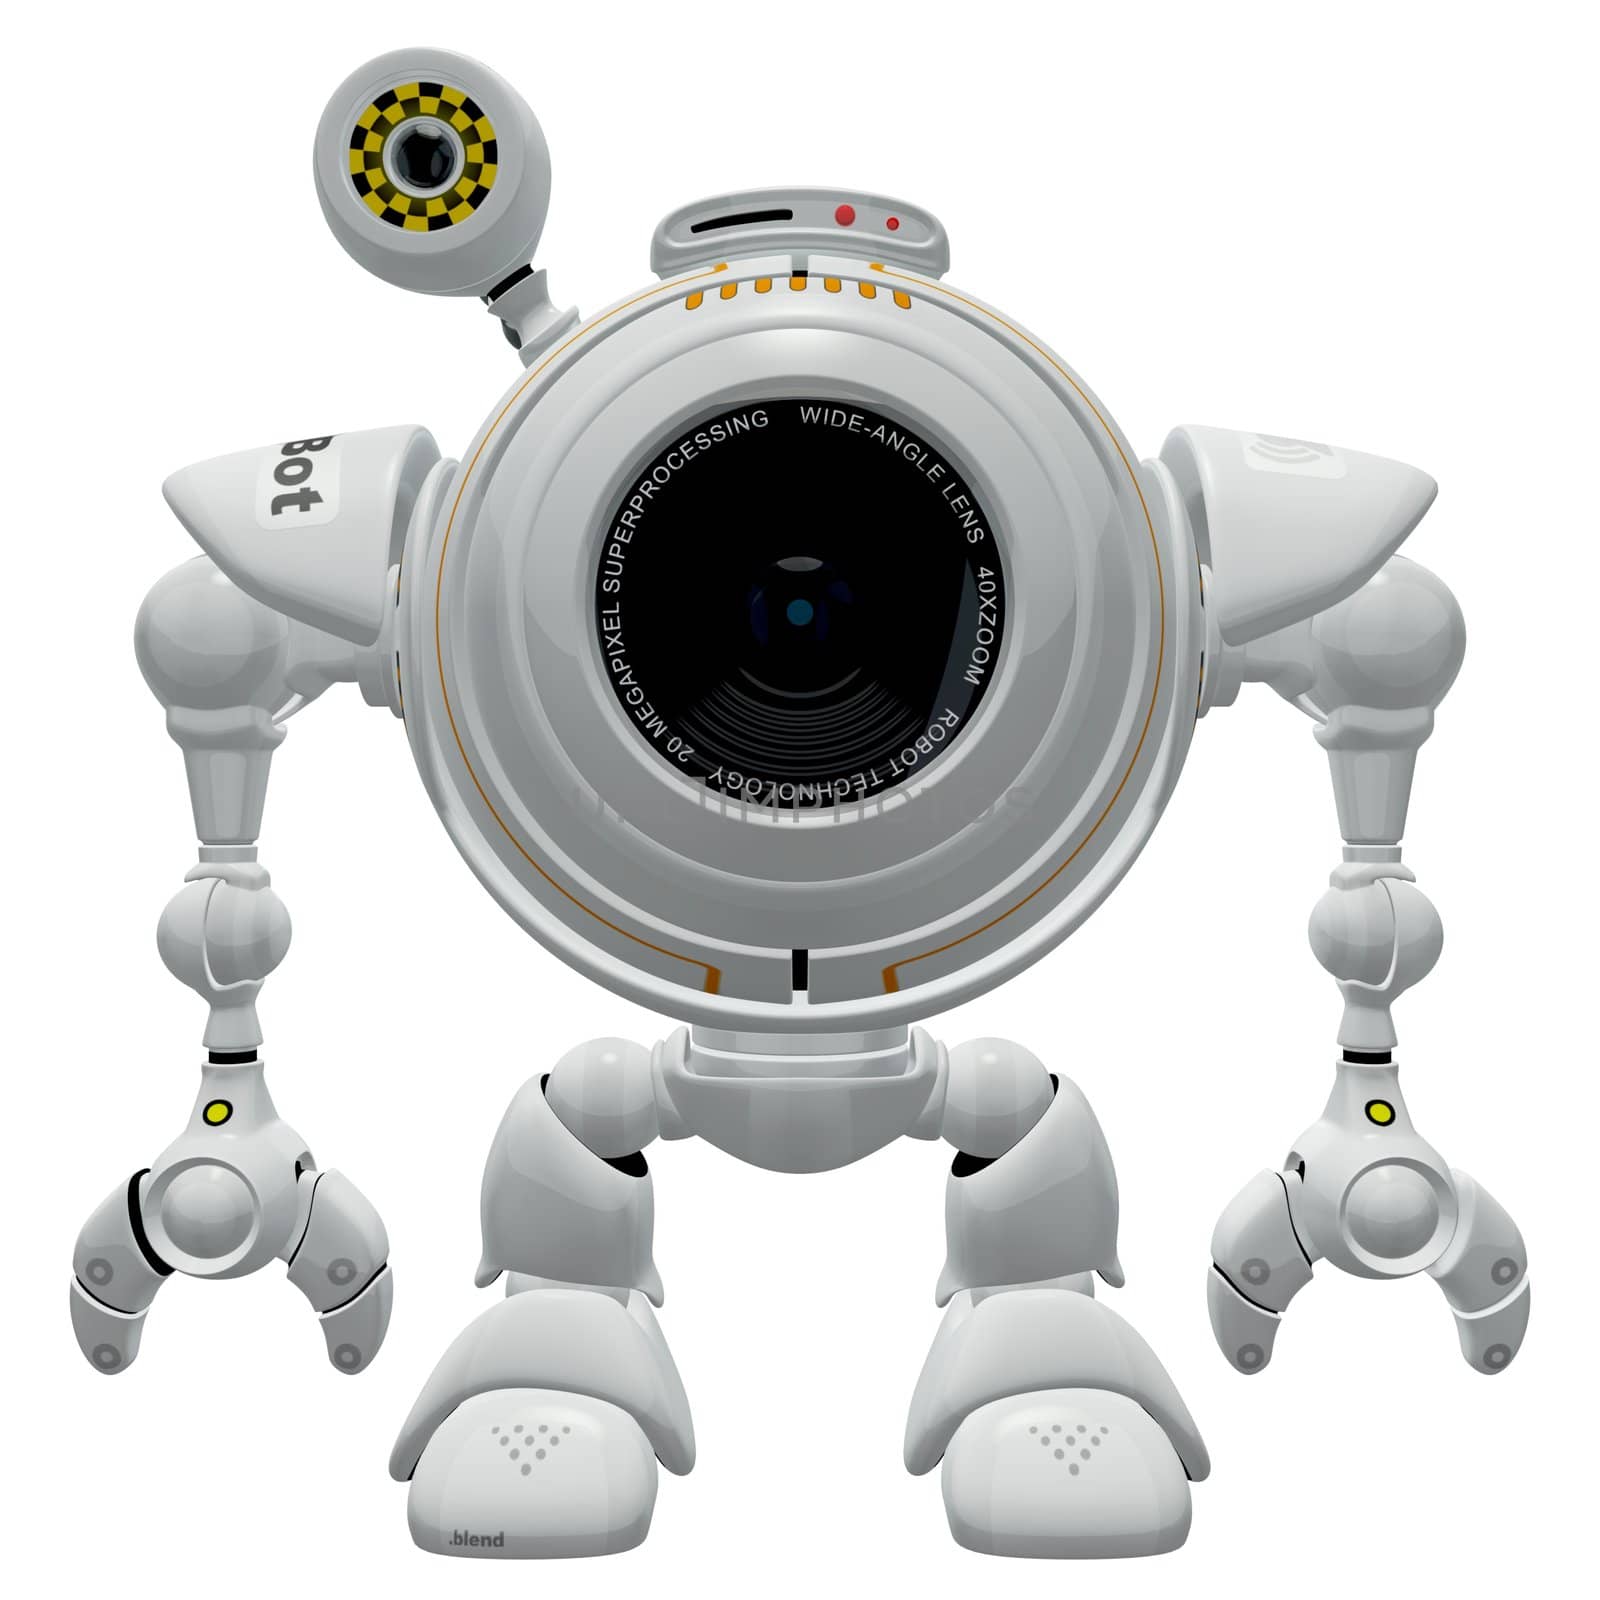 A robot web cam standing straight up in his un-posed stance. This is a handy version of him for something more mechanical or impersonal. 